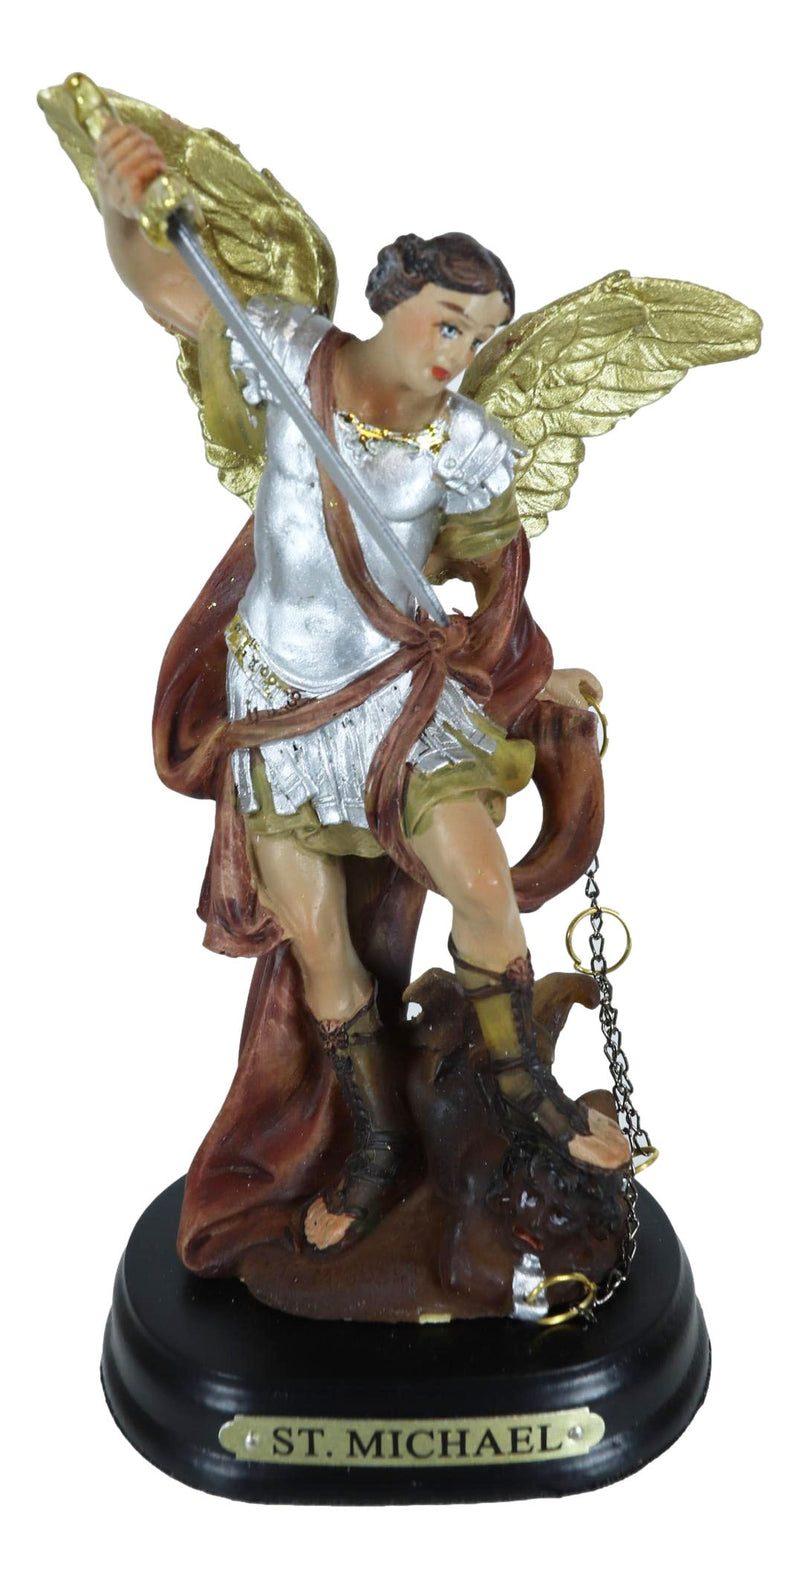 Archangel Michael God's General 5" Inch Holy Religious Figurine Altar Sculpture